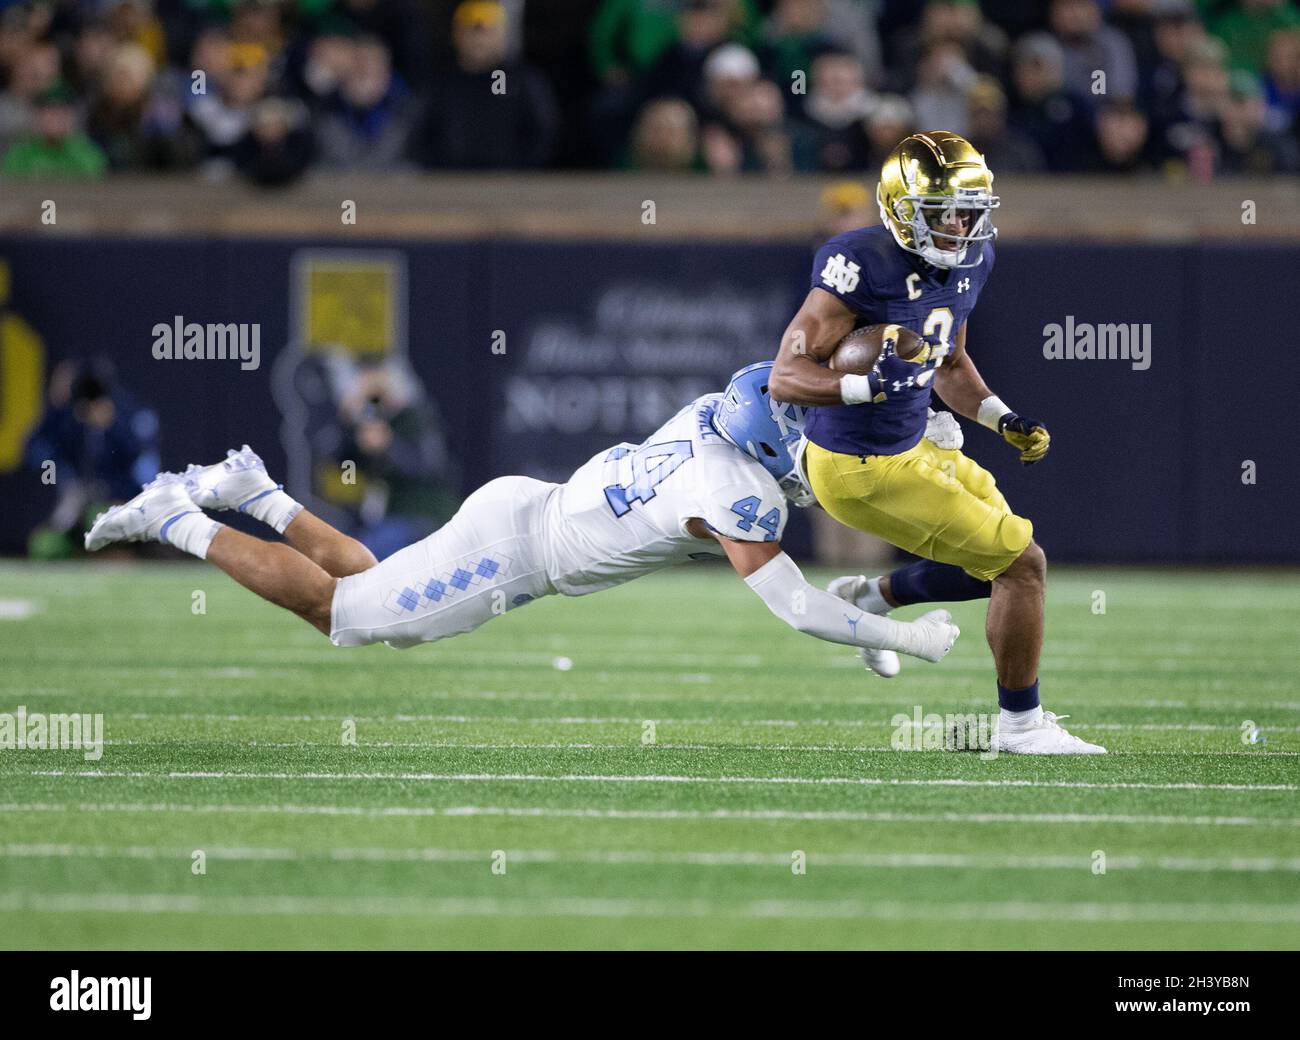 South Bend, Indiana, USA. 30th Oct, 2021. Notre Dame wide receiver Avery Davis (3) runs with the ball after the catch as North Carolina linebacker Jeremiah Gemmel (44) makes diving attempt at the tackle during NCAA football game action between the North Carolina Tar Heels and the Notre Dame Fighting Irish at Notre Dame Stadium in South Bend, Indiana. John Mersits/CSM/Alamy Live News Stock Photo